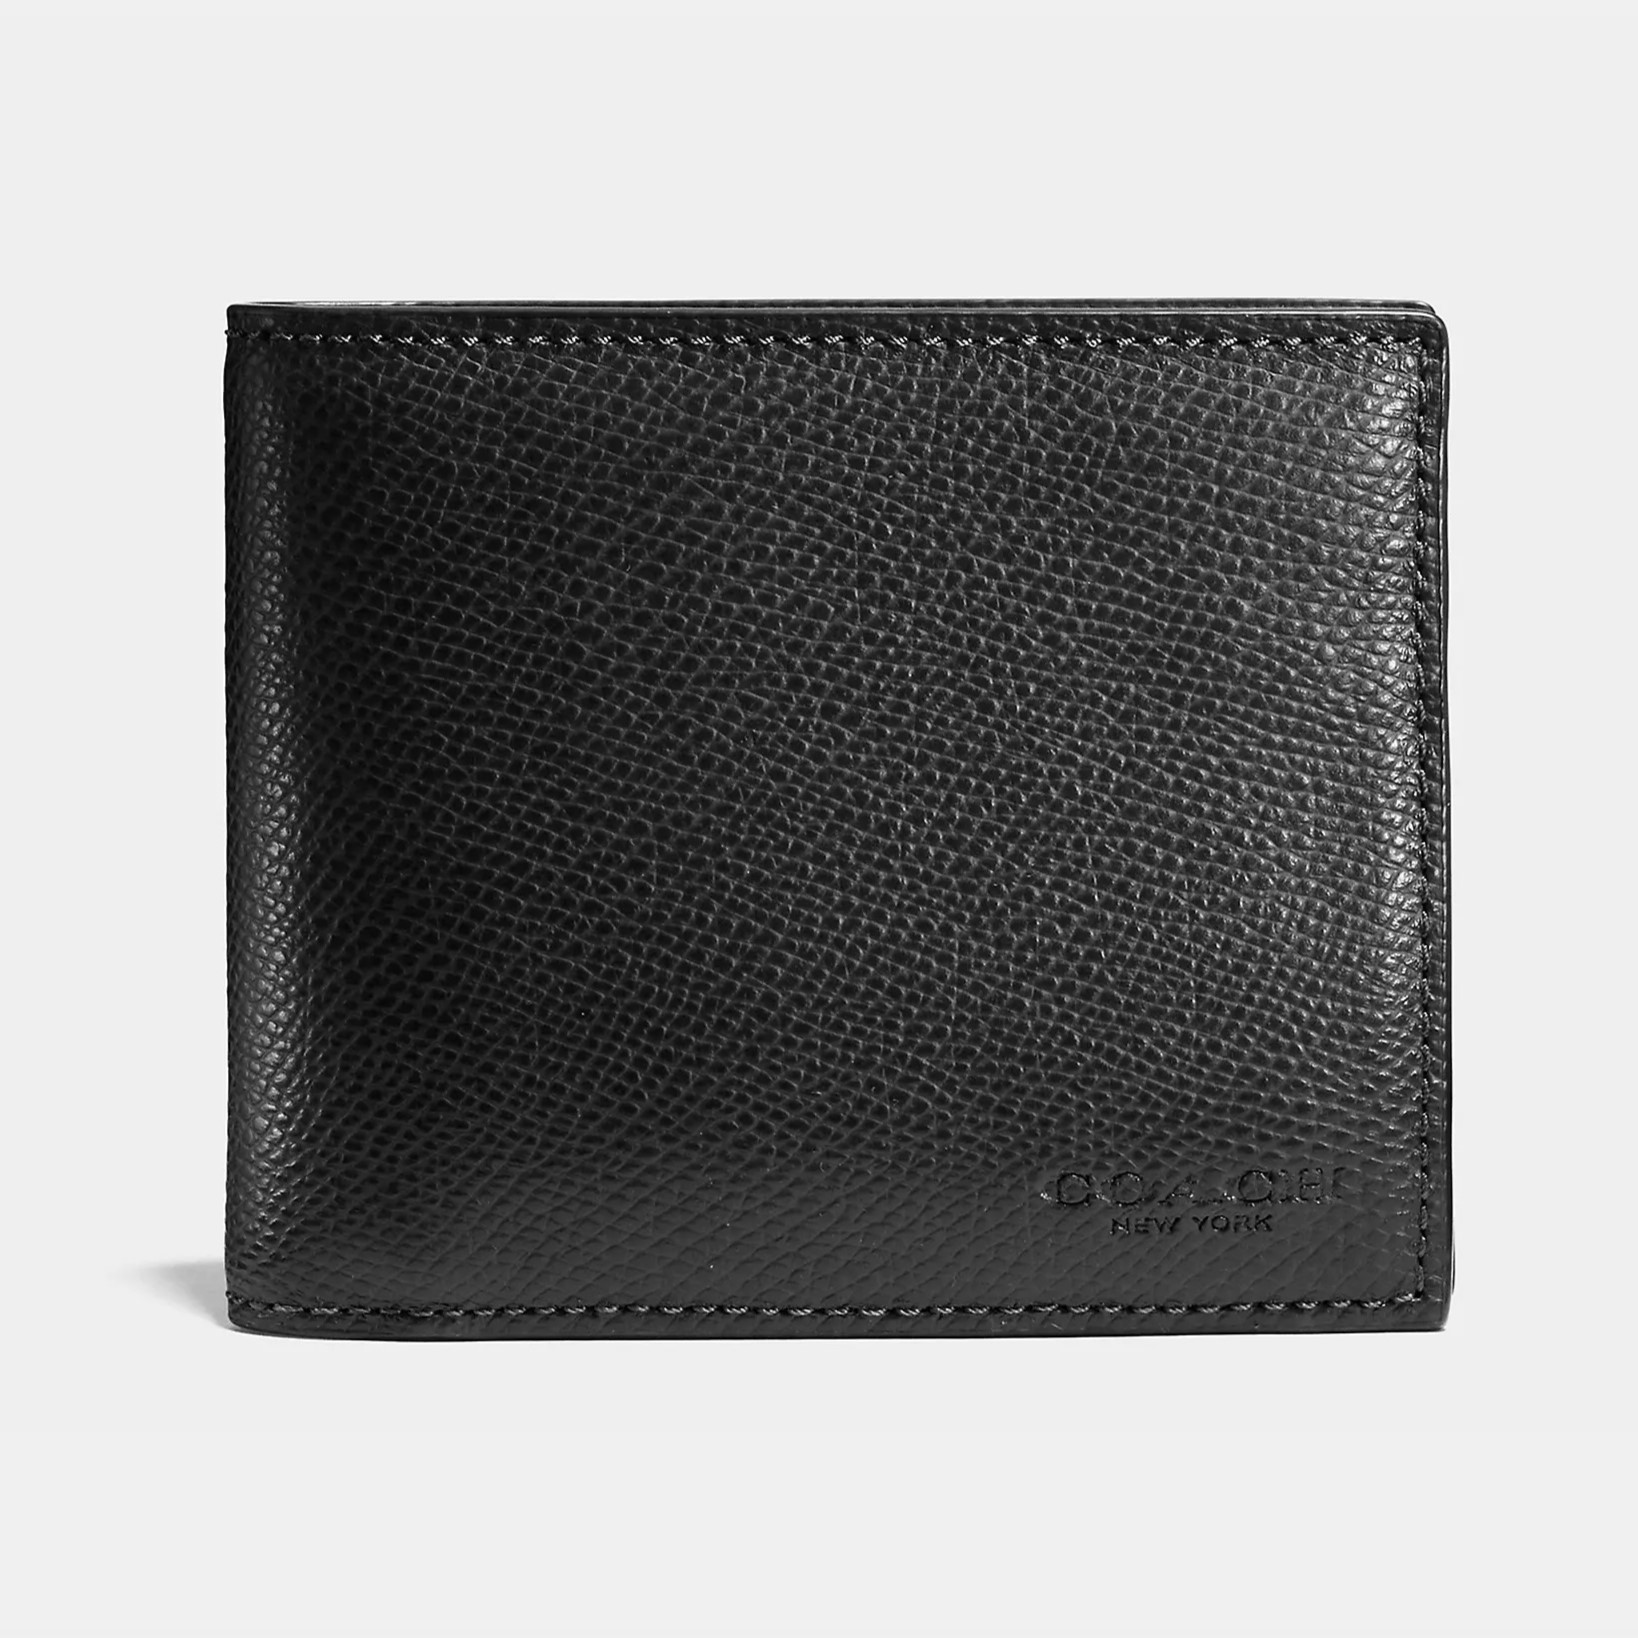 VÍ NGẮN NAM COACH BLACK COMPACT ID CROSSGRAIN LEATHER WALLET F59112 2